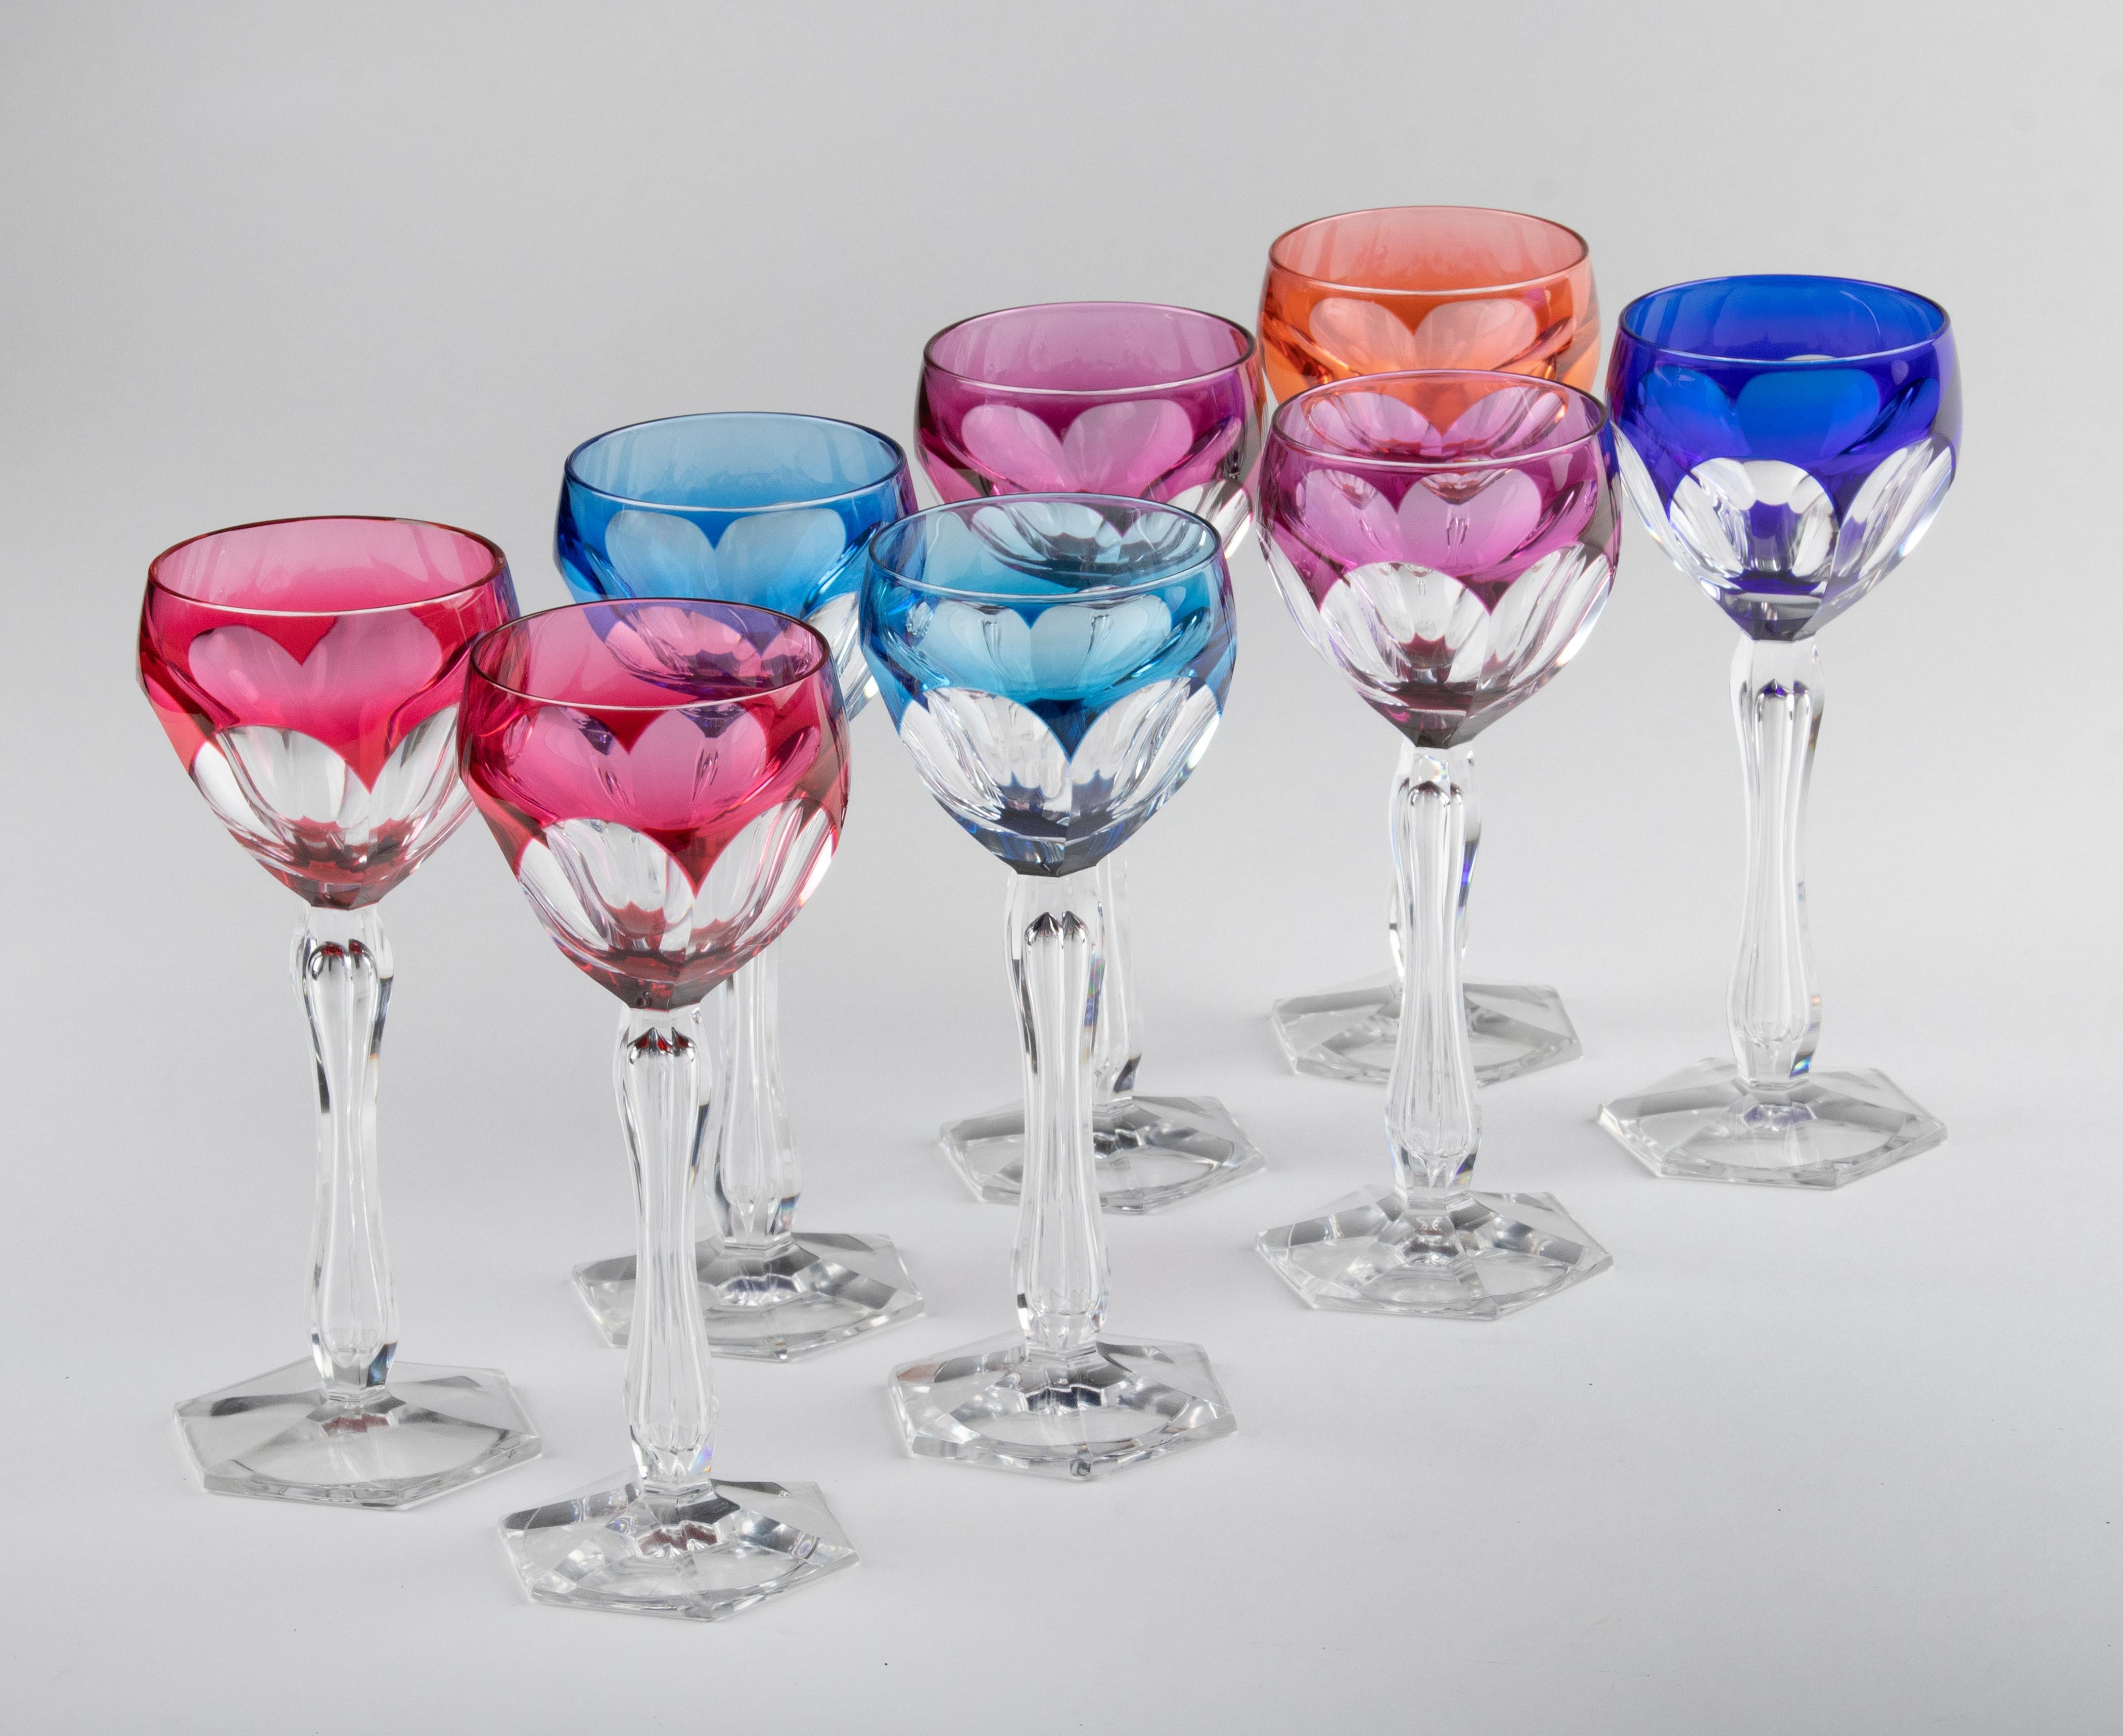 Beautiful set of 8 crystal colored wine glasses, made by the Belgian manufacturer Val Saint Lambert. The glasses have a deep, clear color and beautiful cuts. The inside of the stem is nicely decorated. The glasses are not marked, but this is a